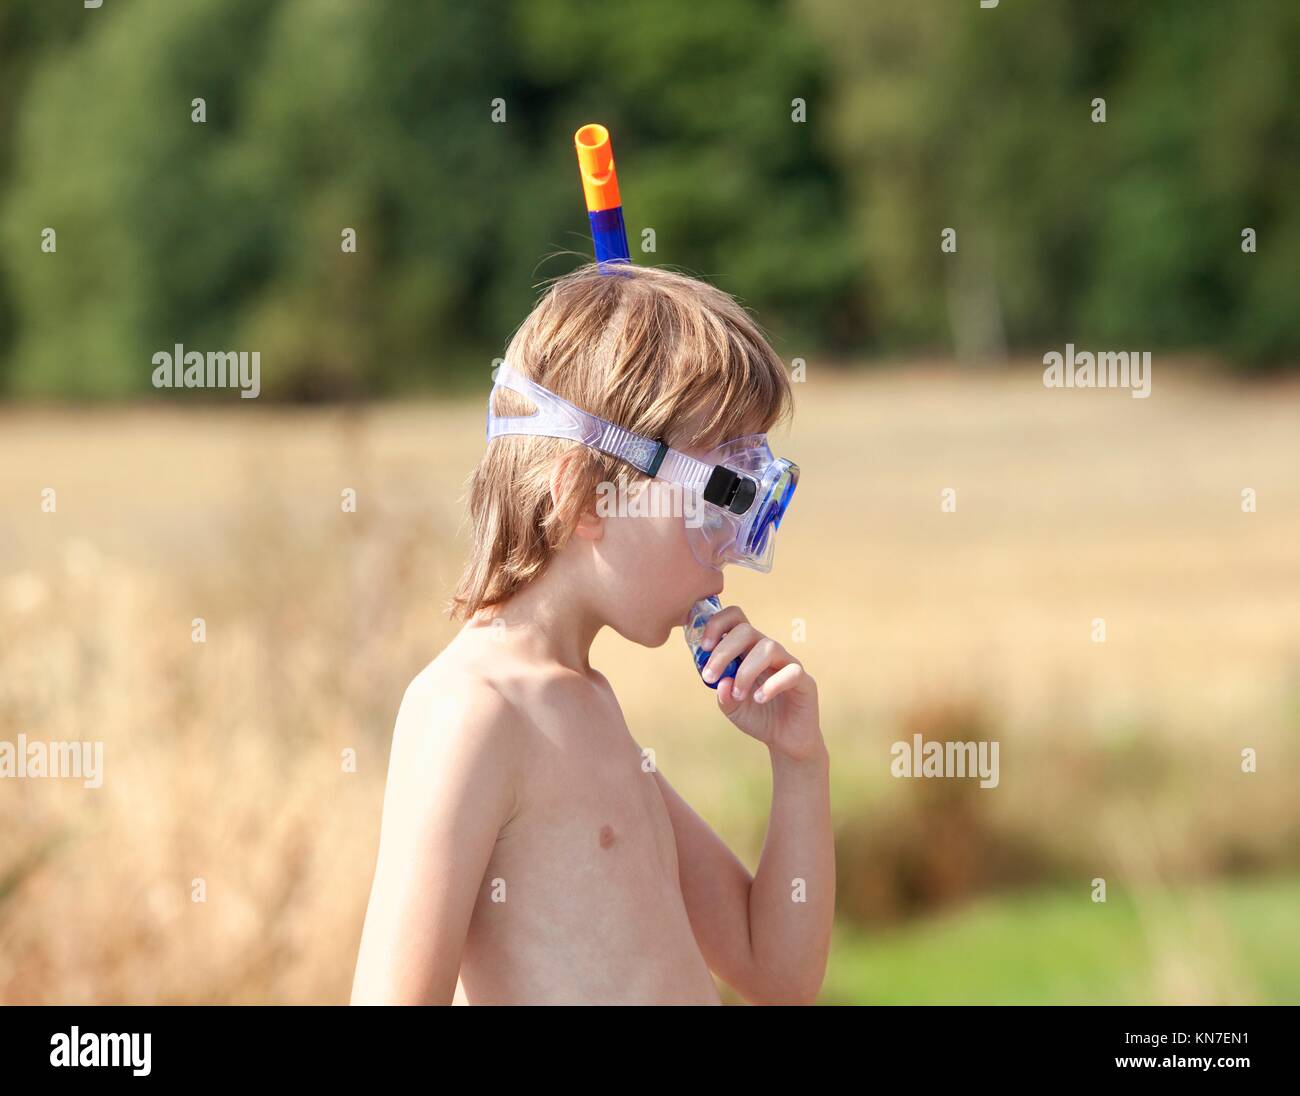 Boy Fitting in Breathing Tube before Snorkeling. Stock Photo